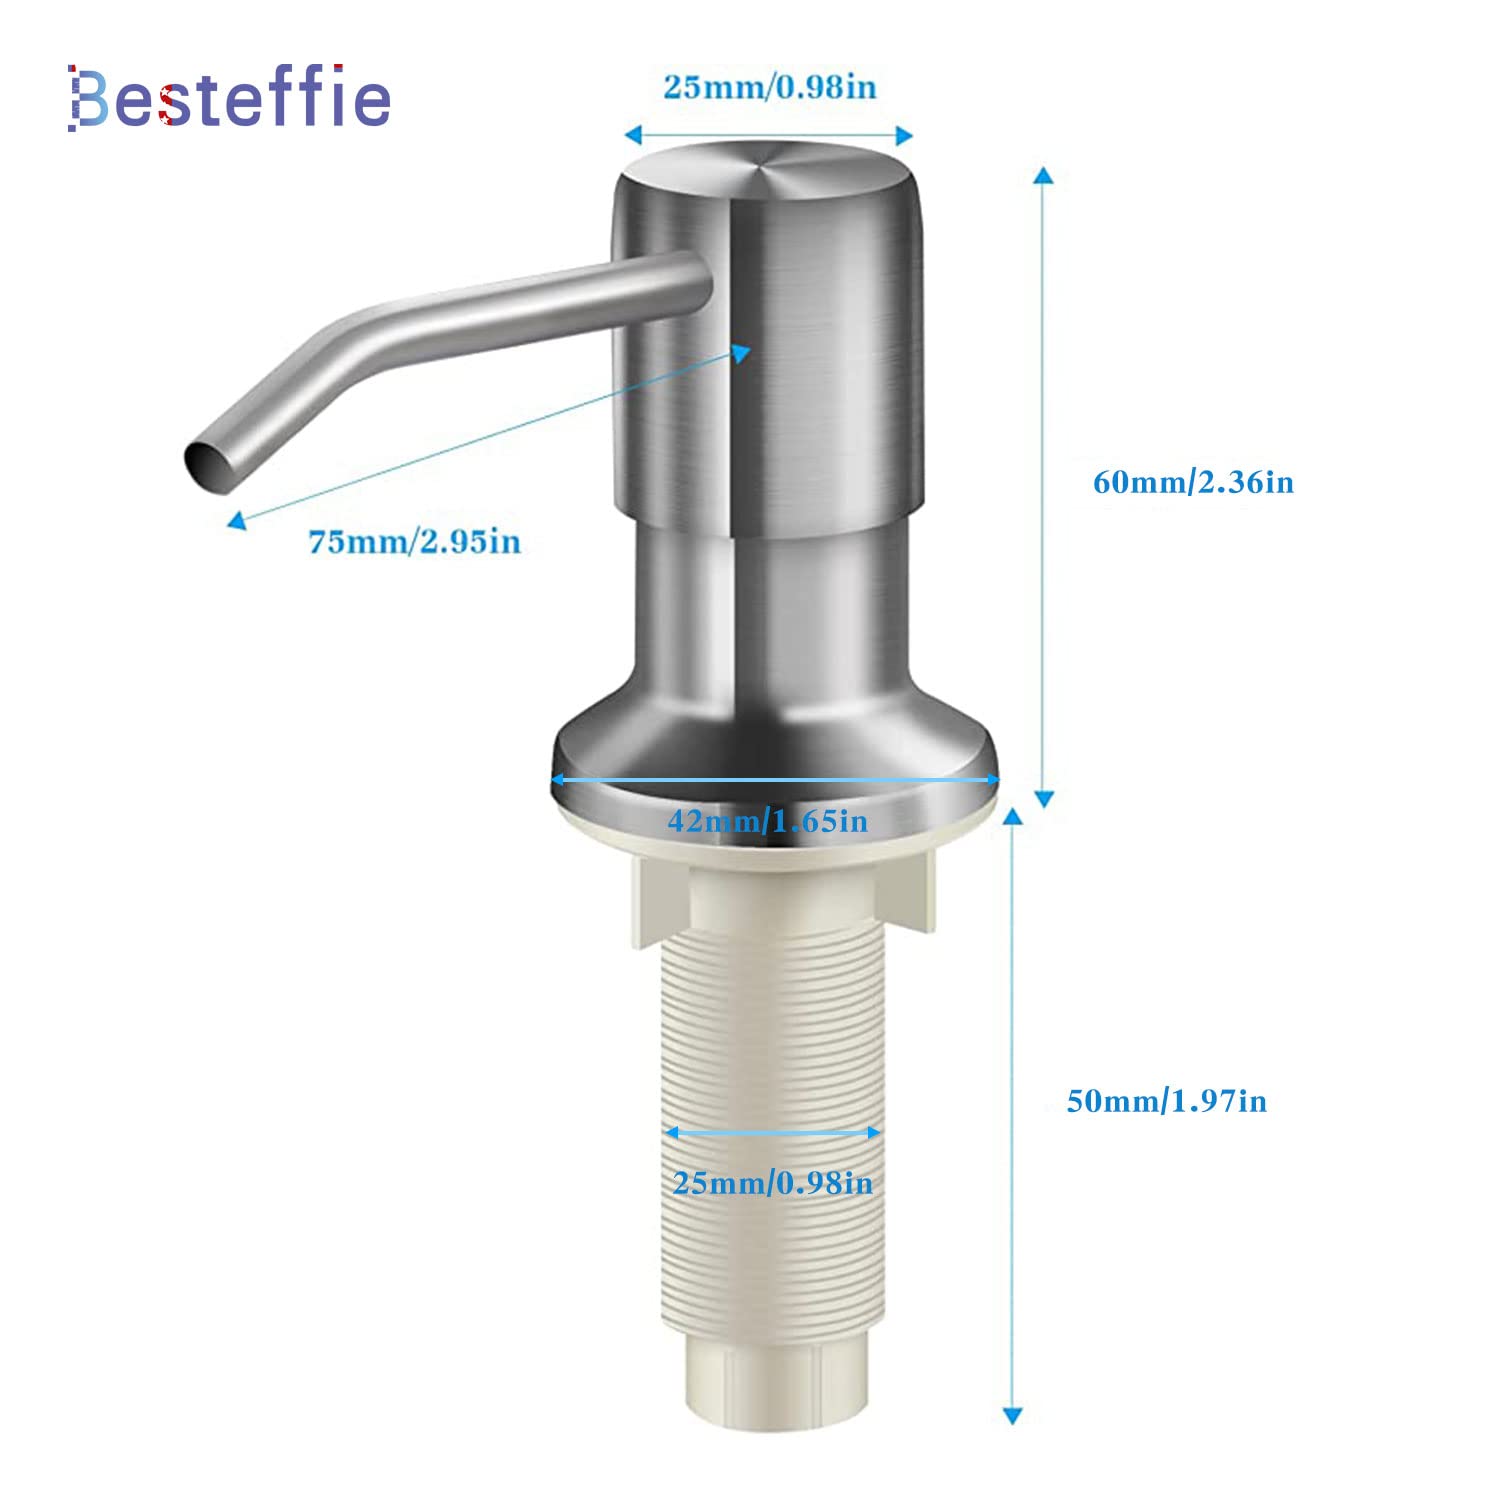 Soap Dispenser for Kitchen Sink,Kitchen soap Dispenser,47" Tube Connects Directly to Soap Bottle,No More Refills(Brushed Nickel).